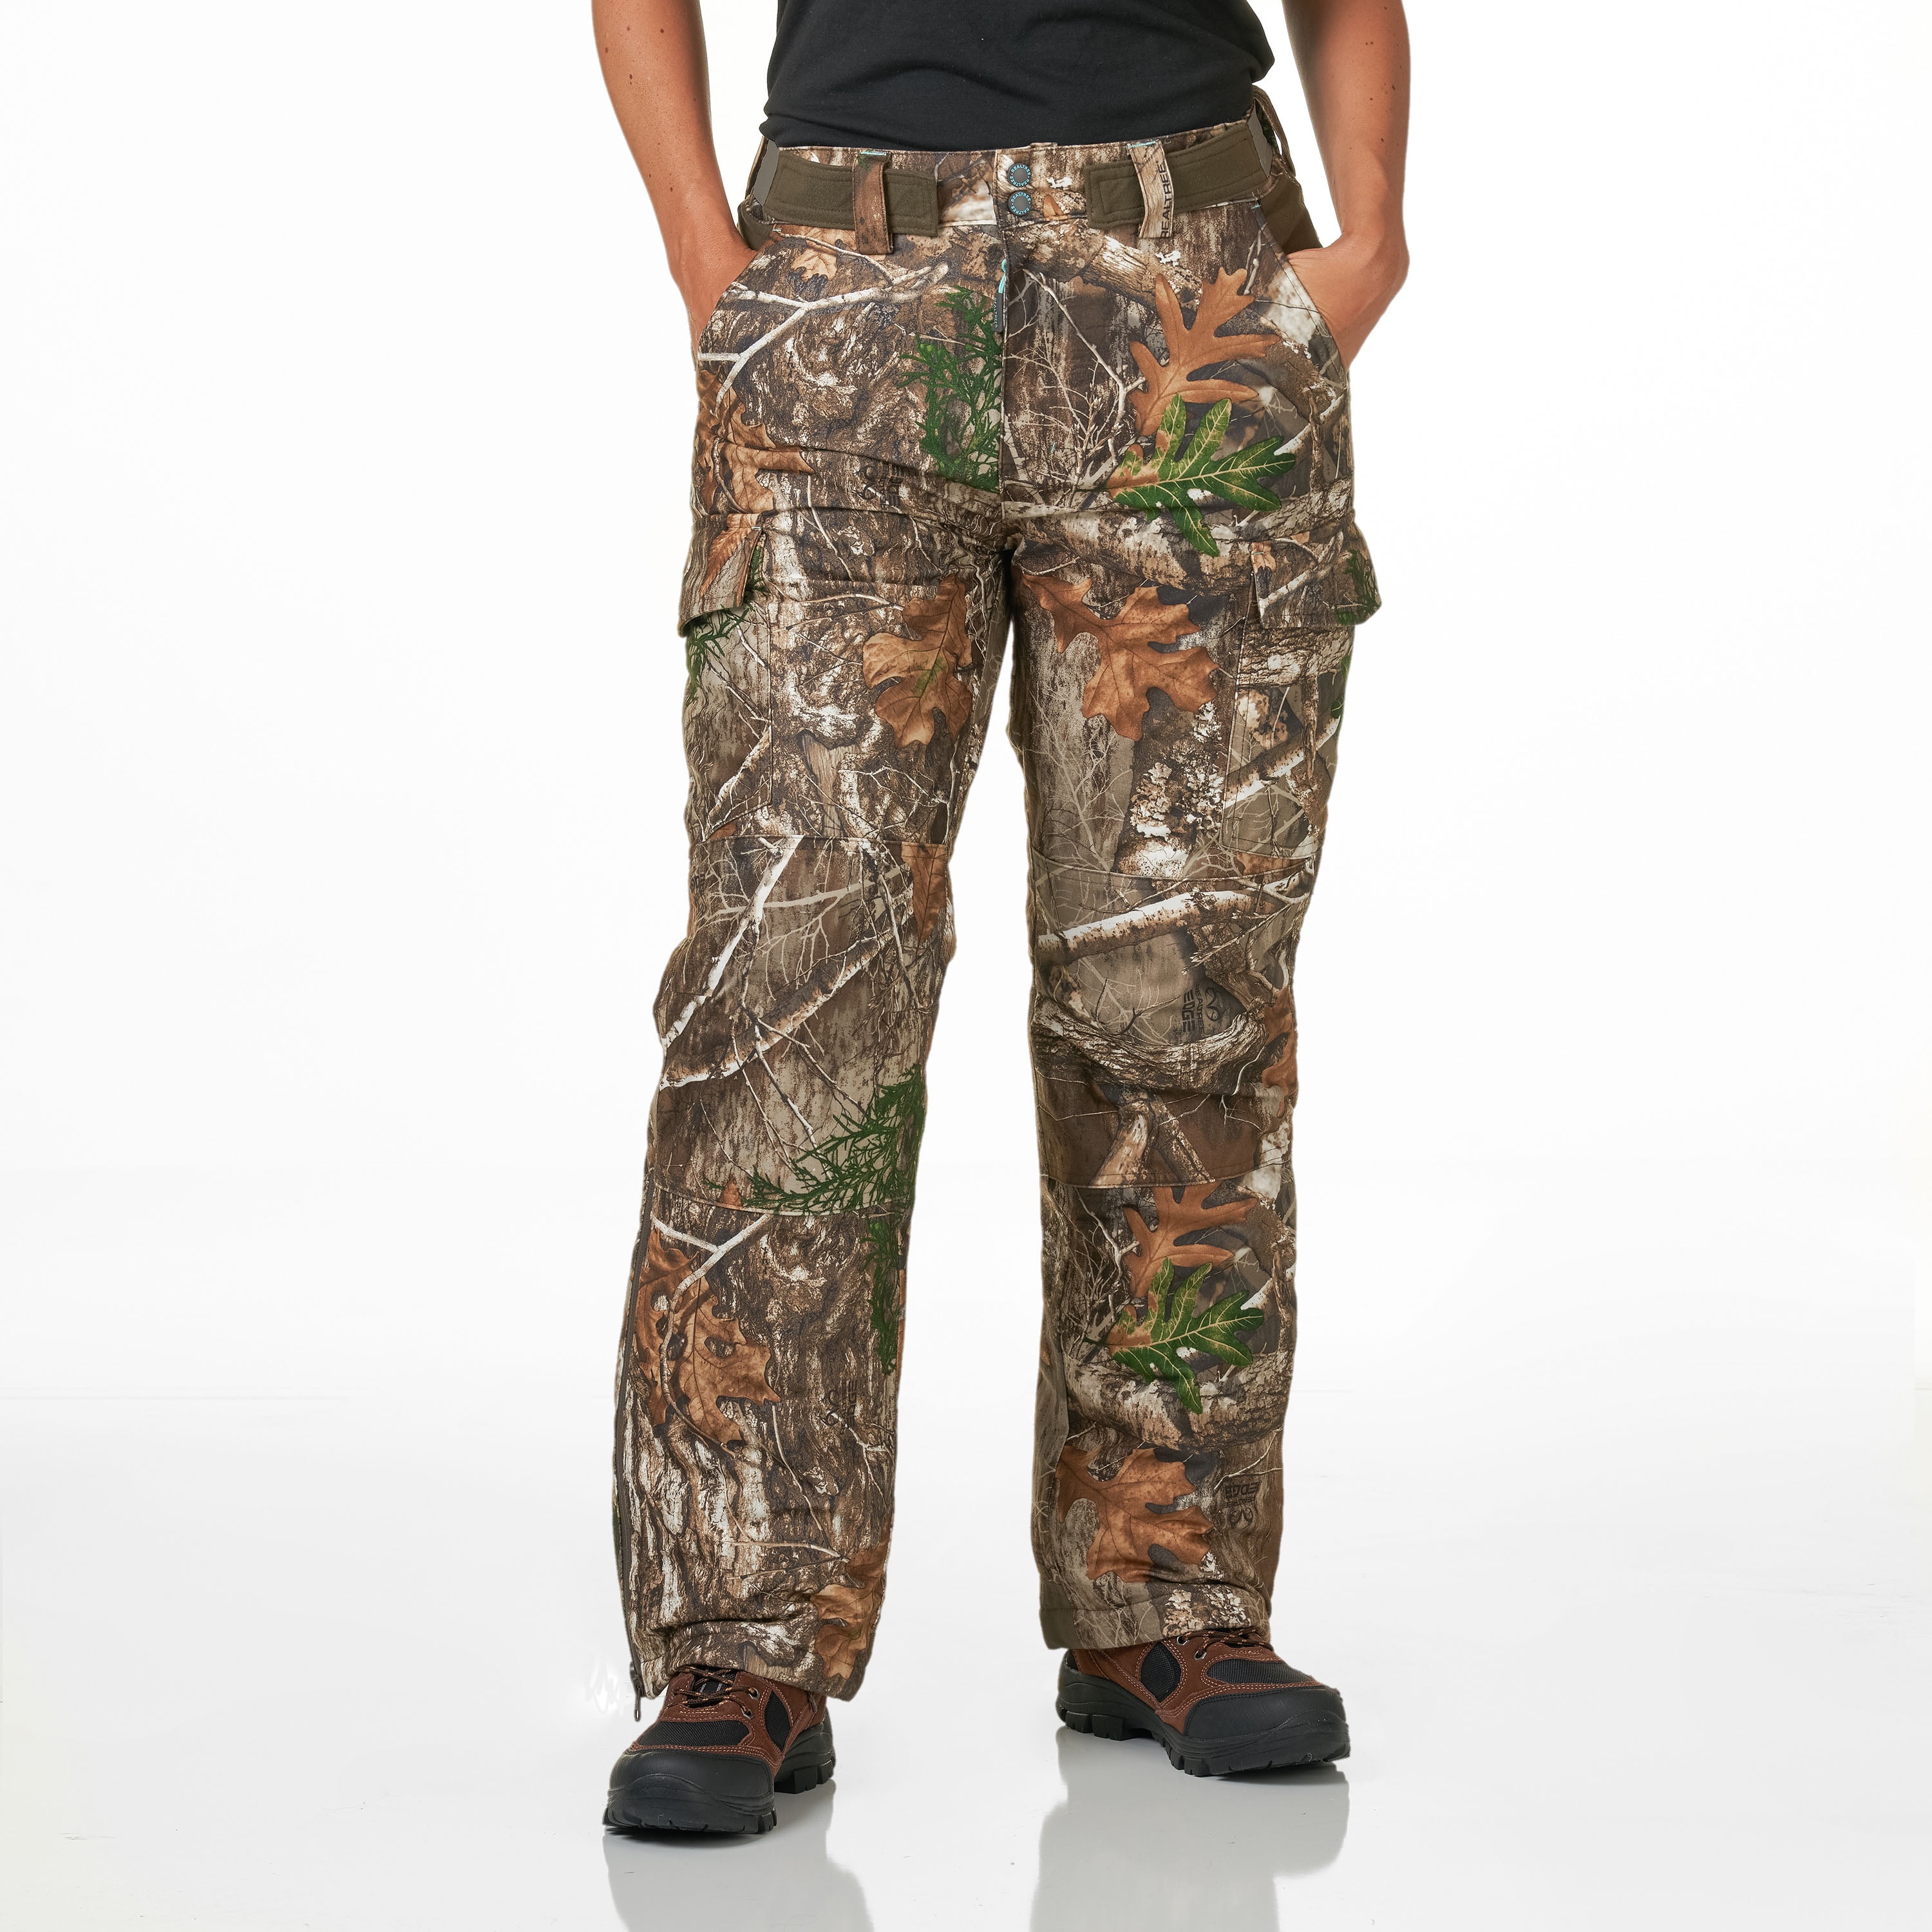 NEW Ladies Realtree Xtra Hunting Cargo Pants Sizes S M L XL XXL Camouflage Women 